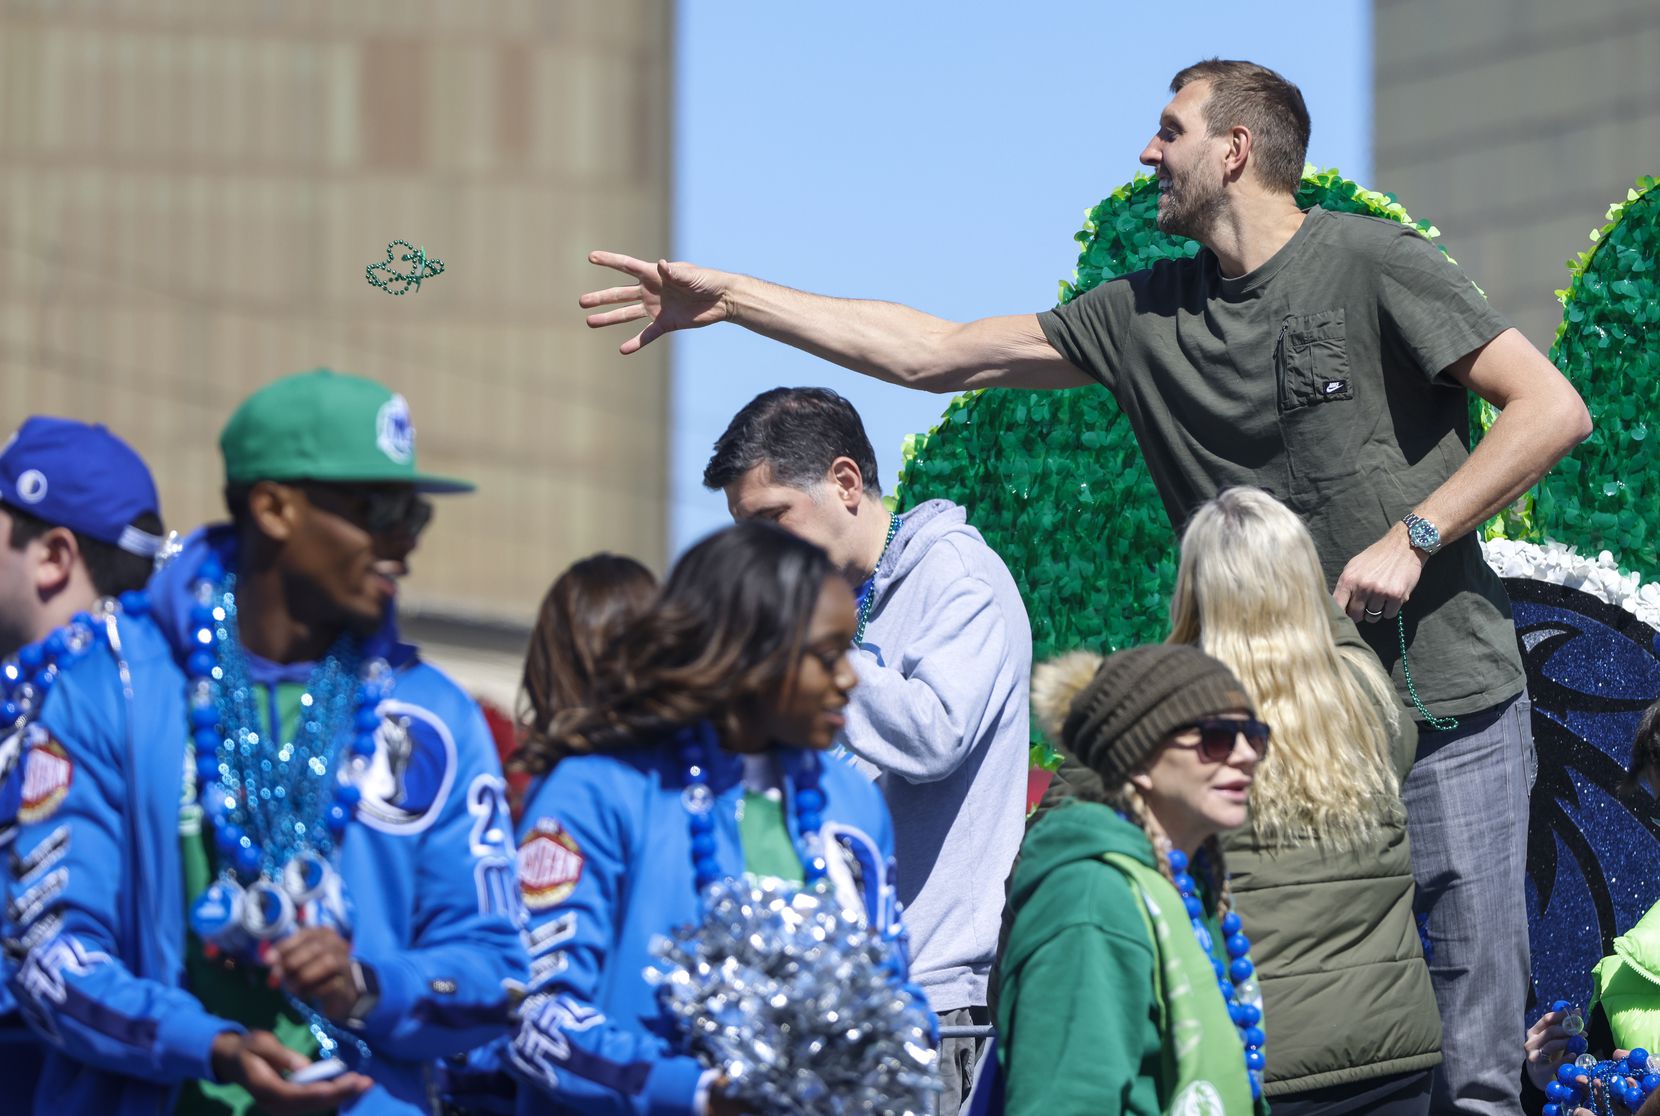 St. Patrick’s Day parade returns to Dallas after 2-year hiatus